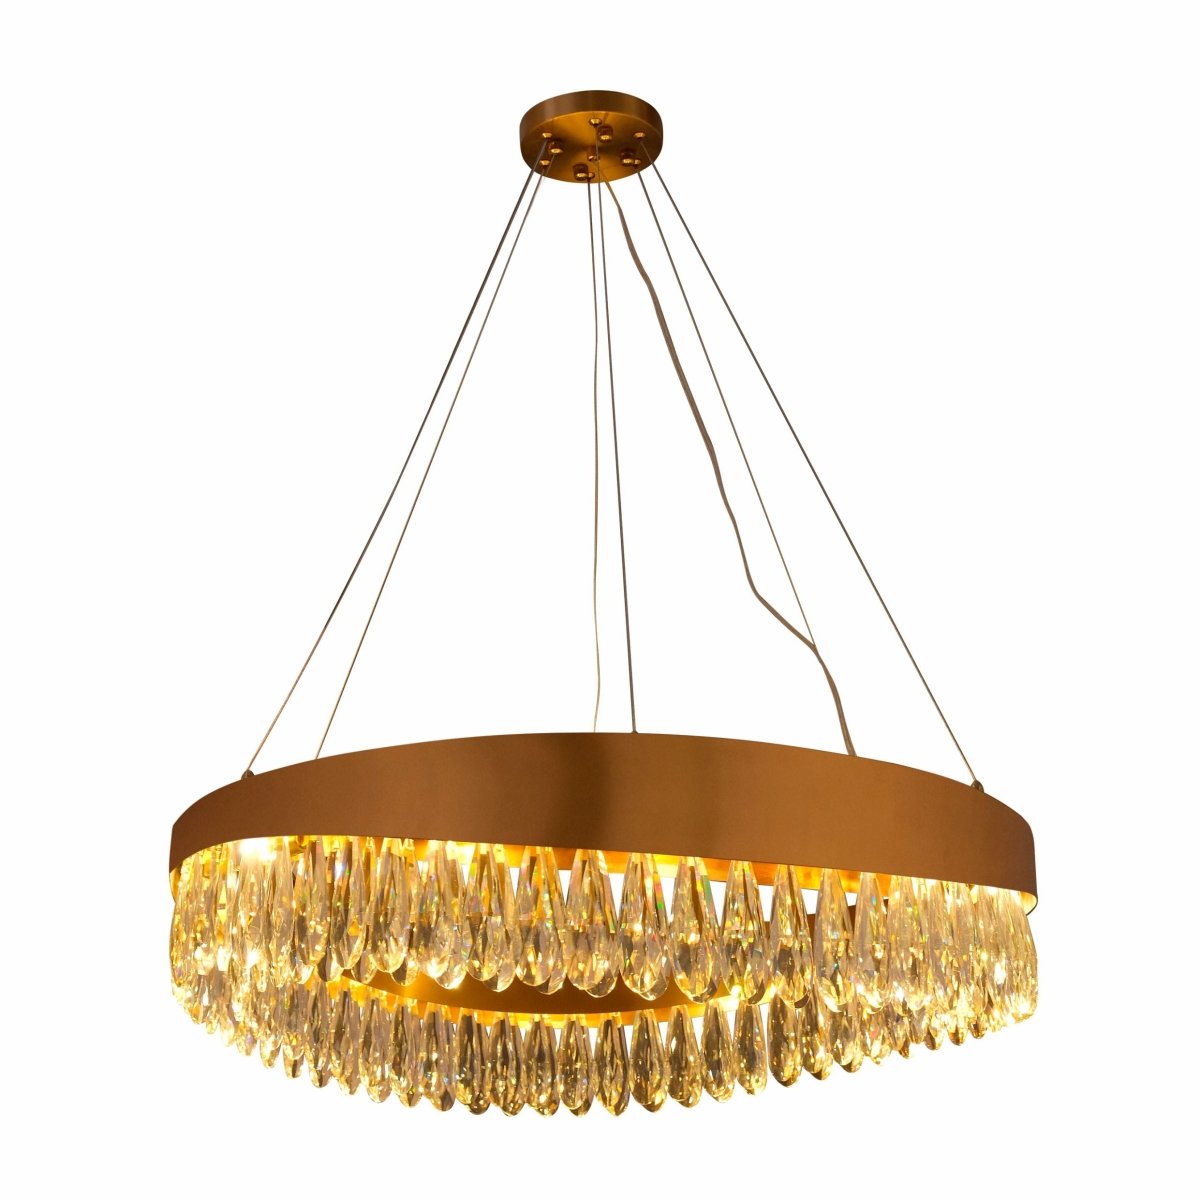 Main image of Faceted Long Pear Crystal Gold Metal Chandelier D800 with 12xG9 Fitting | TEKLED 156-19570